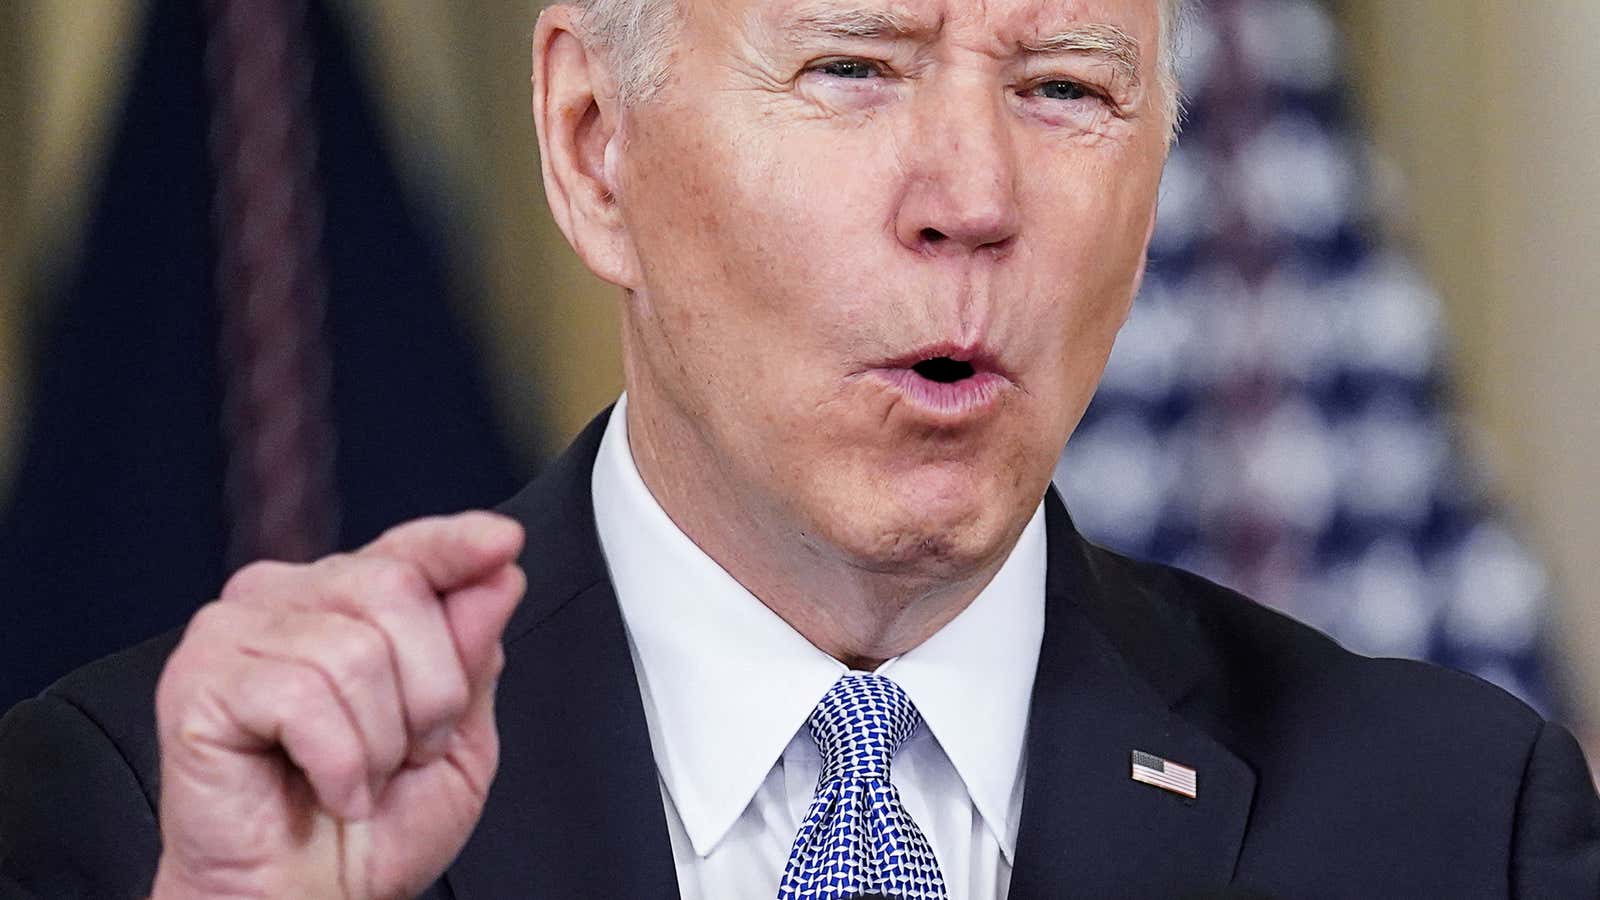 What the Biden plan gets right on inflation